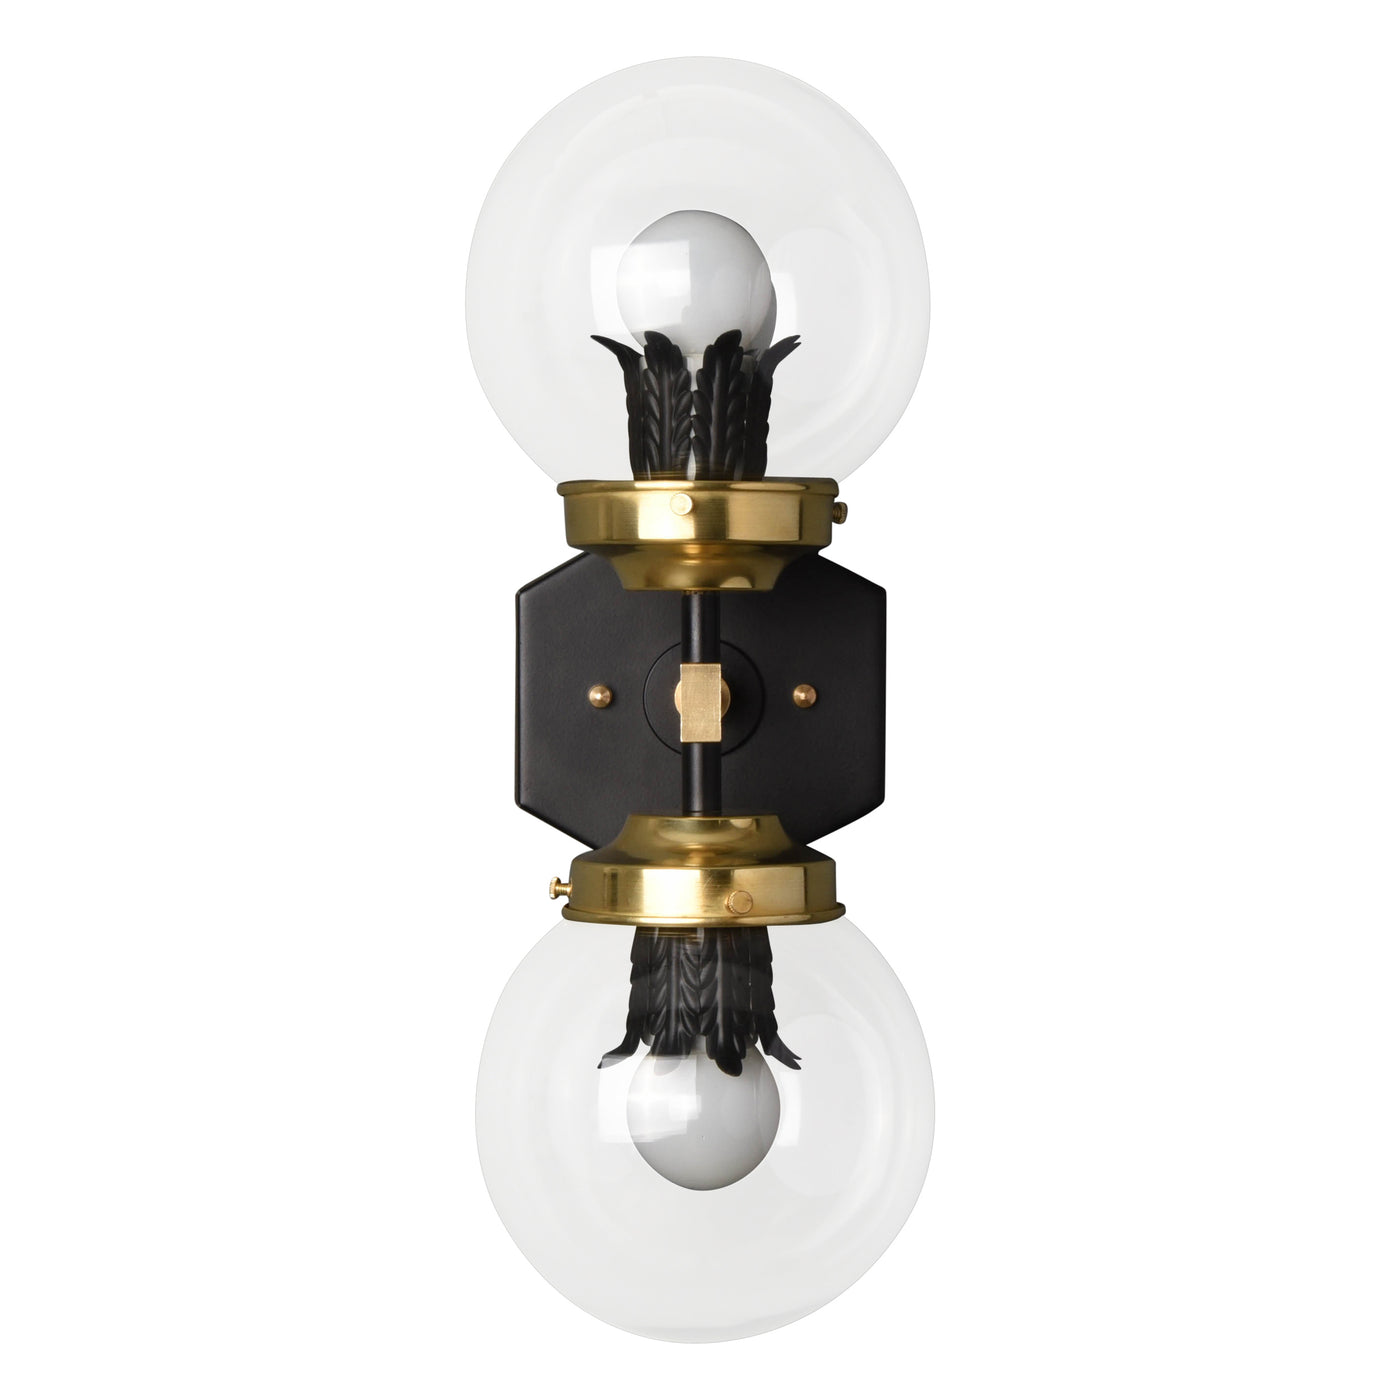 Decorative modern style vertical wall sconce with clear glass globes